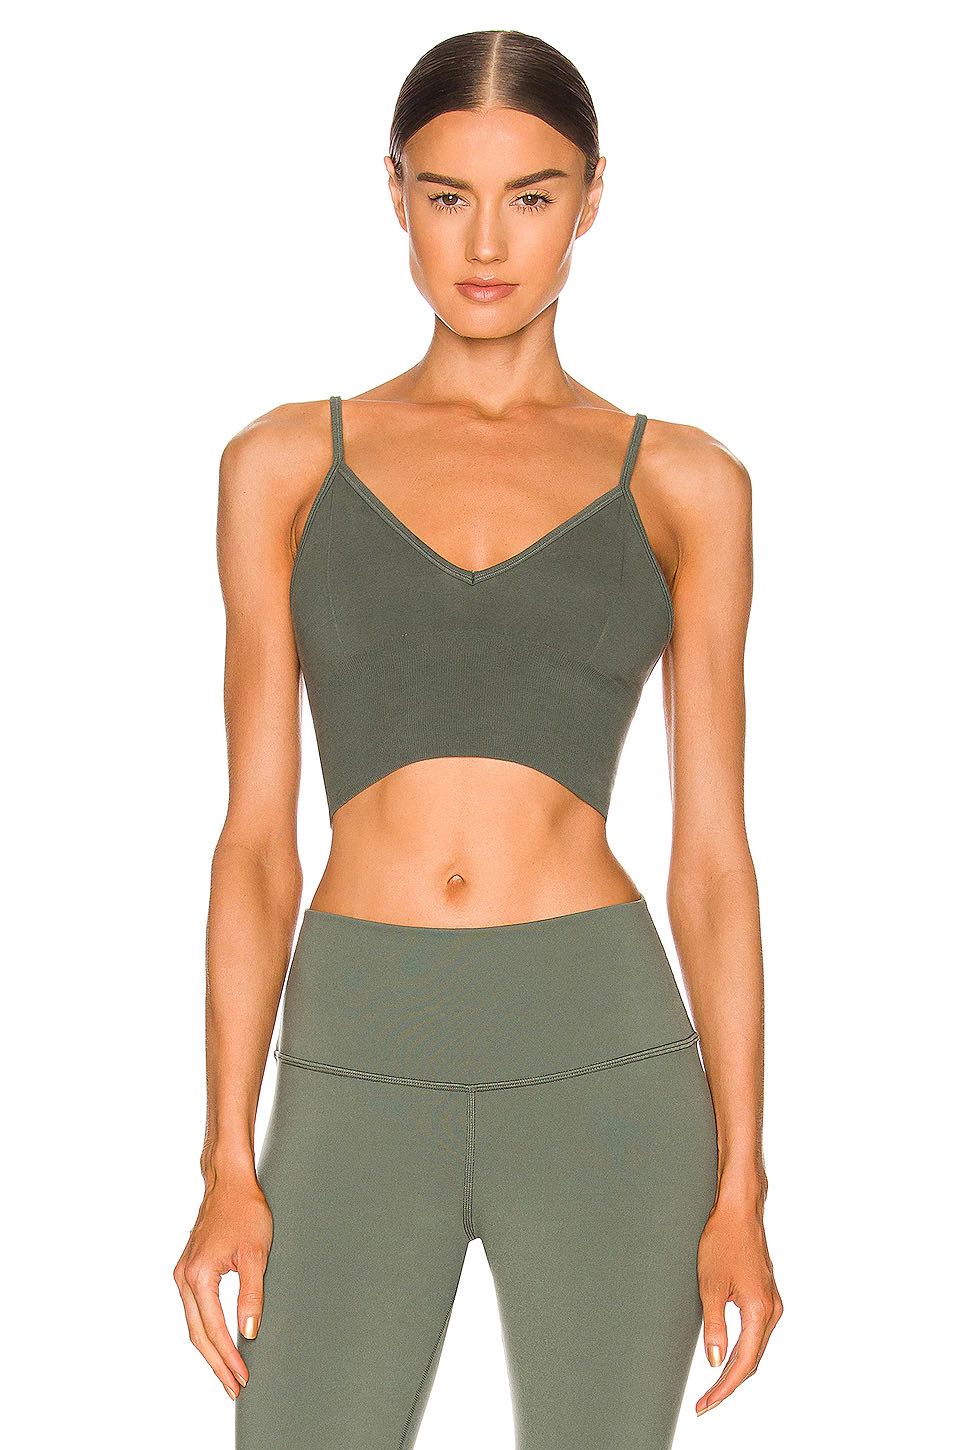 What Clothes To Wear For Hot Yoga